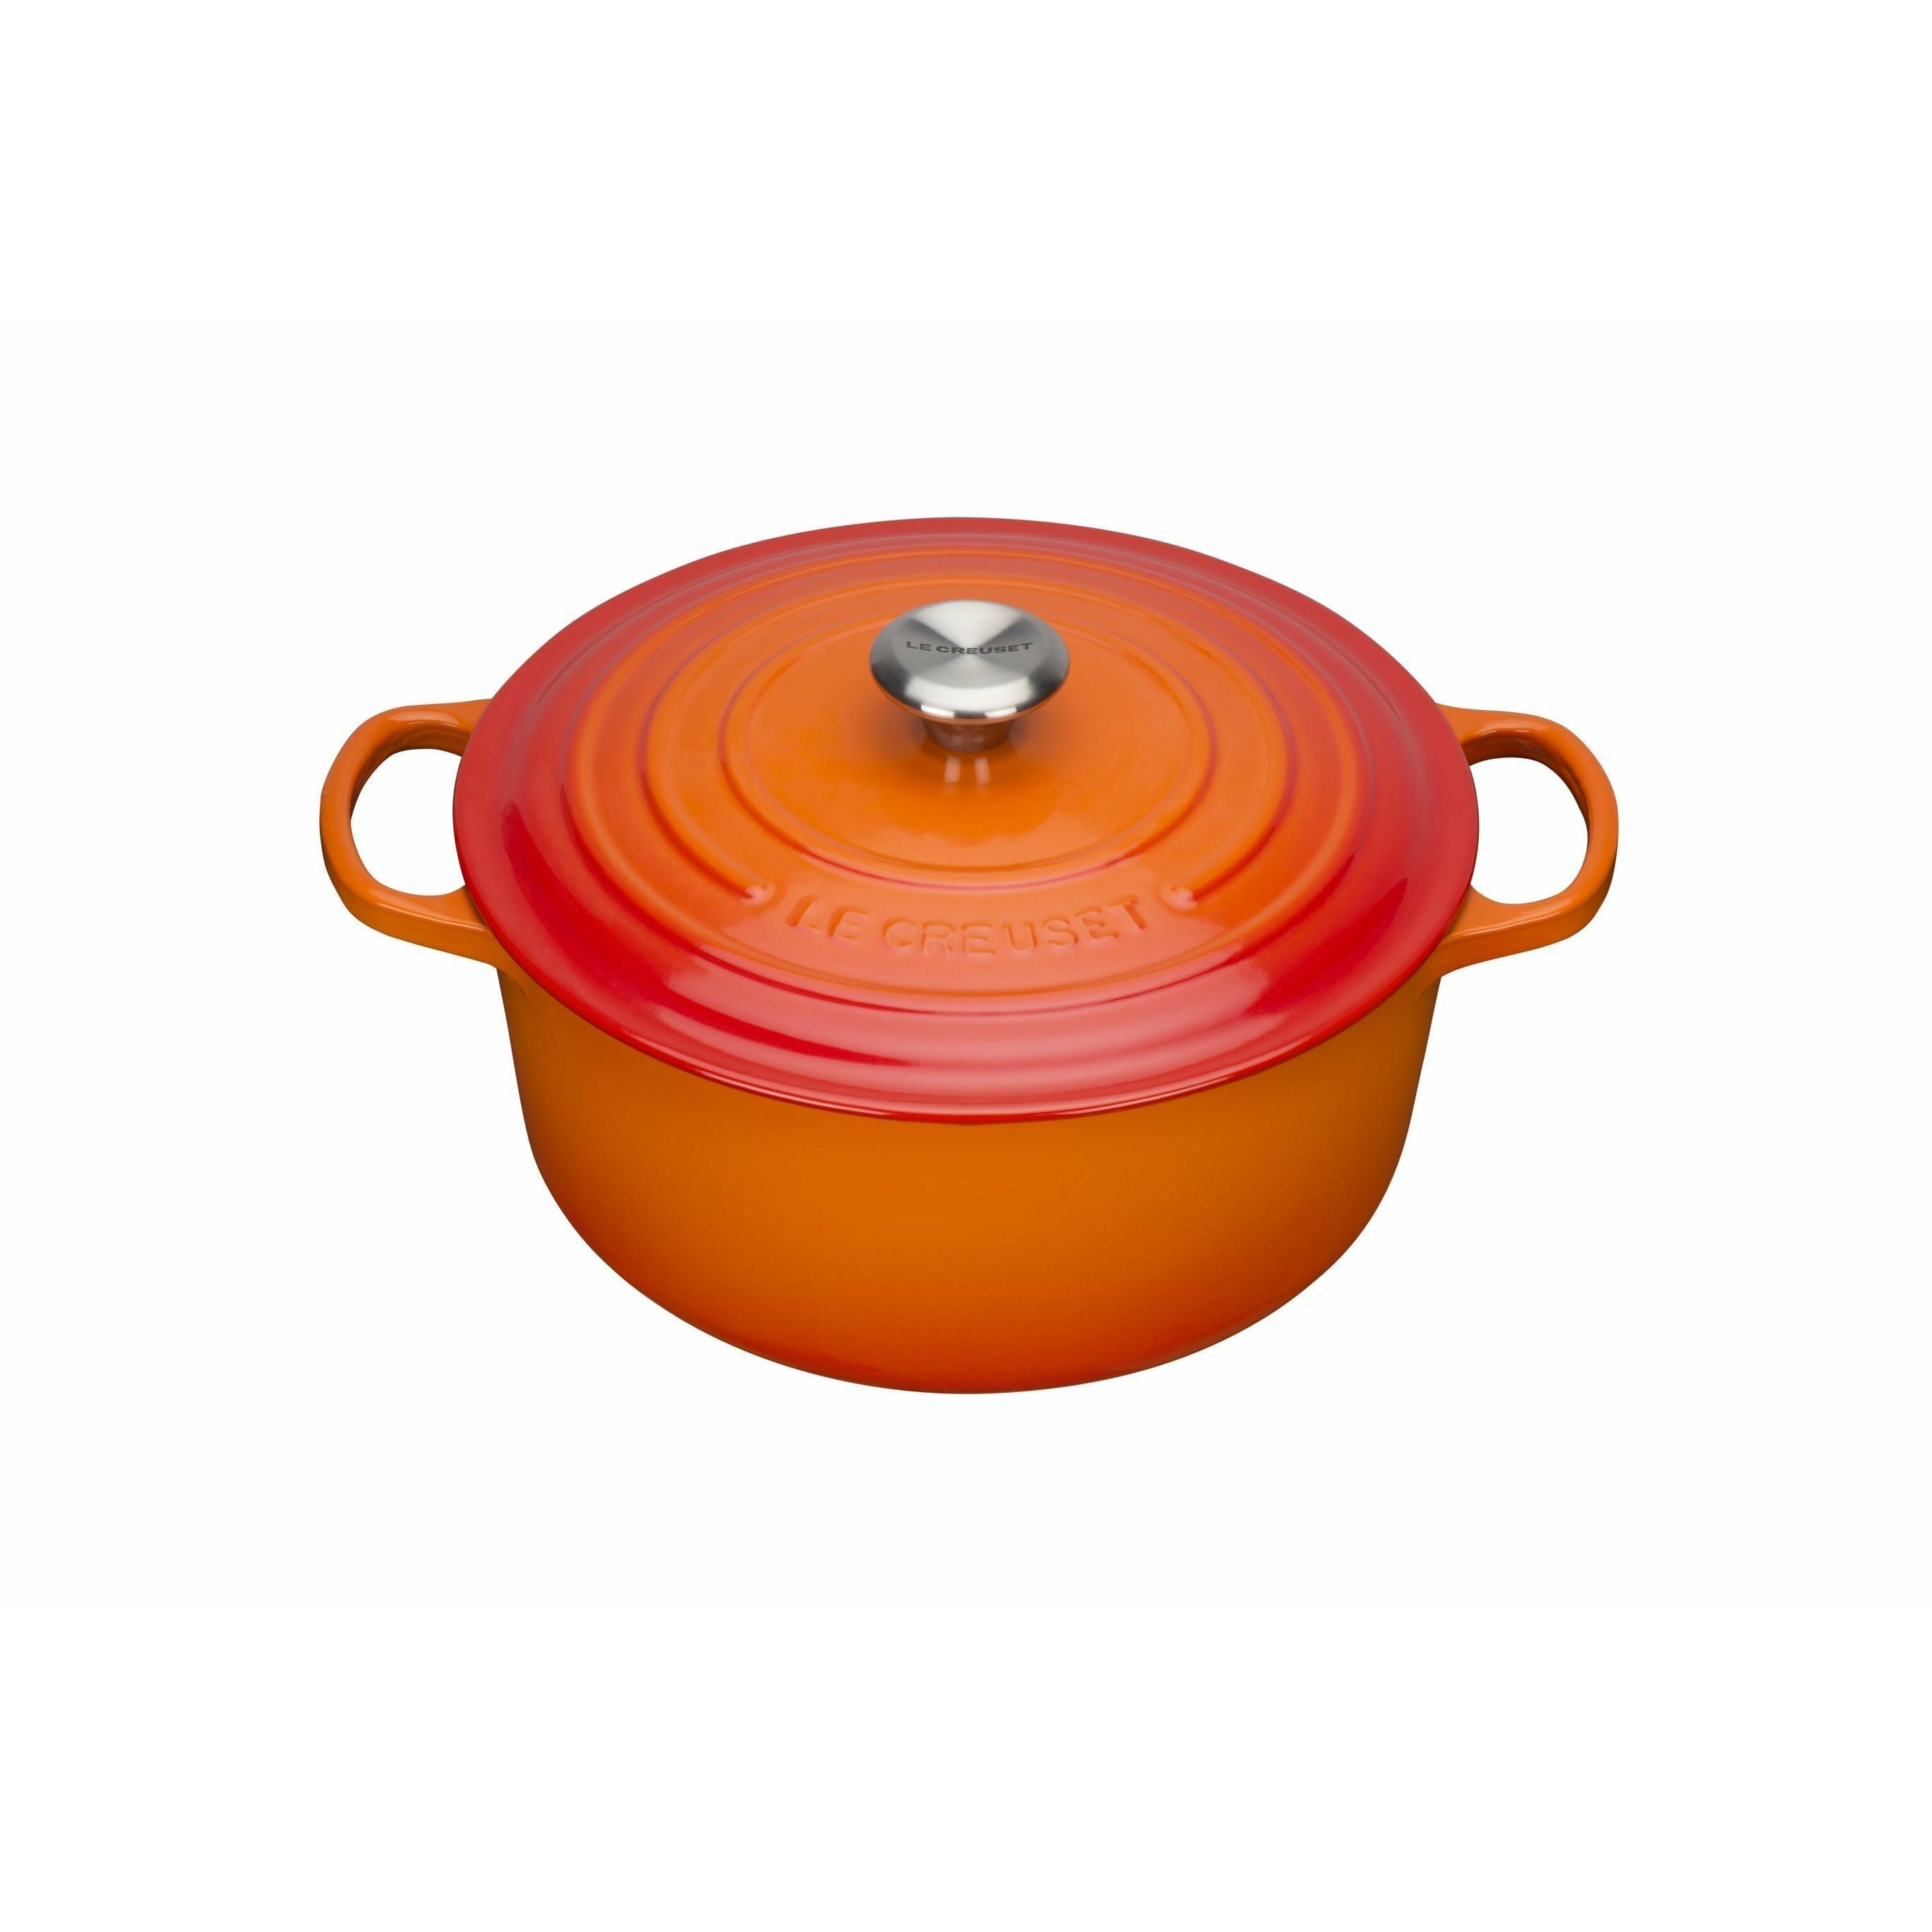 Le Creuset Signature Round Roaster 26 Cm, Oven Red